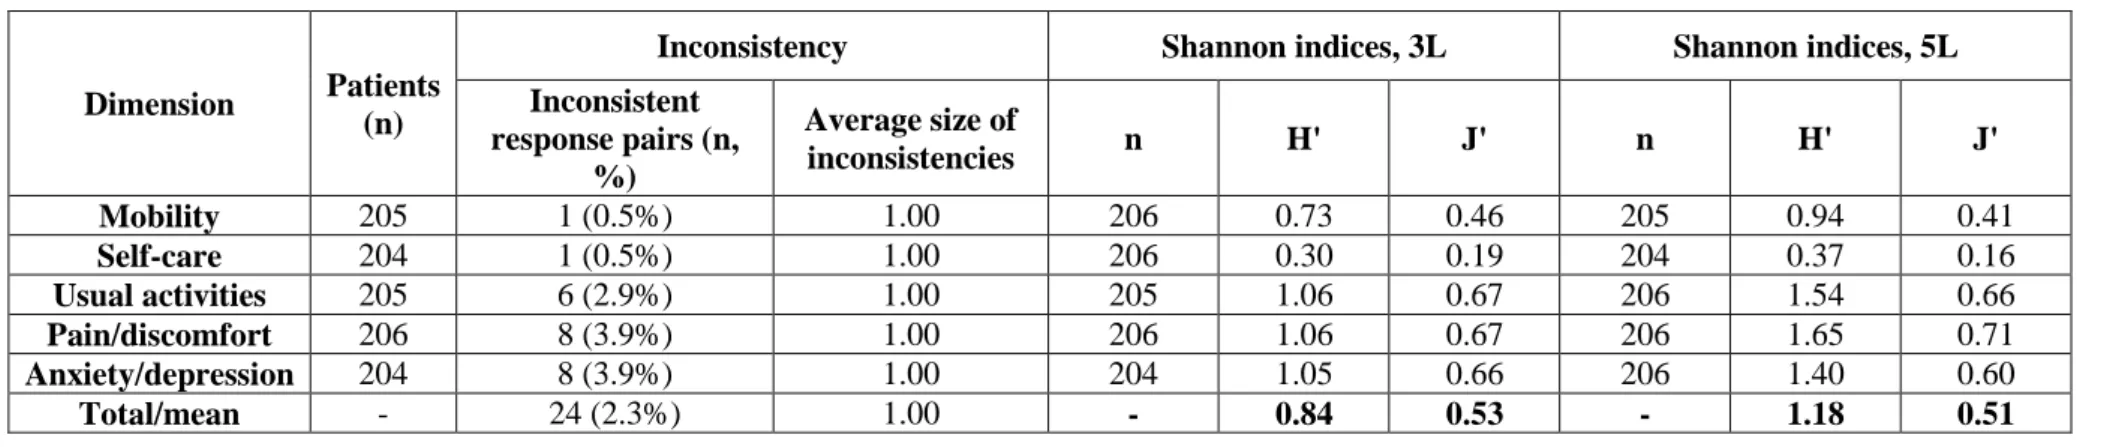 Table 4 Inconsistency between the 3L and 5L versions and Shannon (H') and Shannon Evenness index (J') 